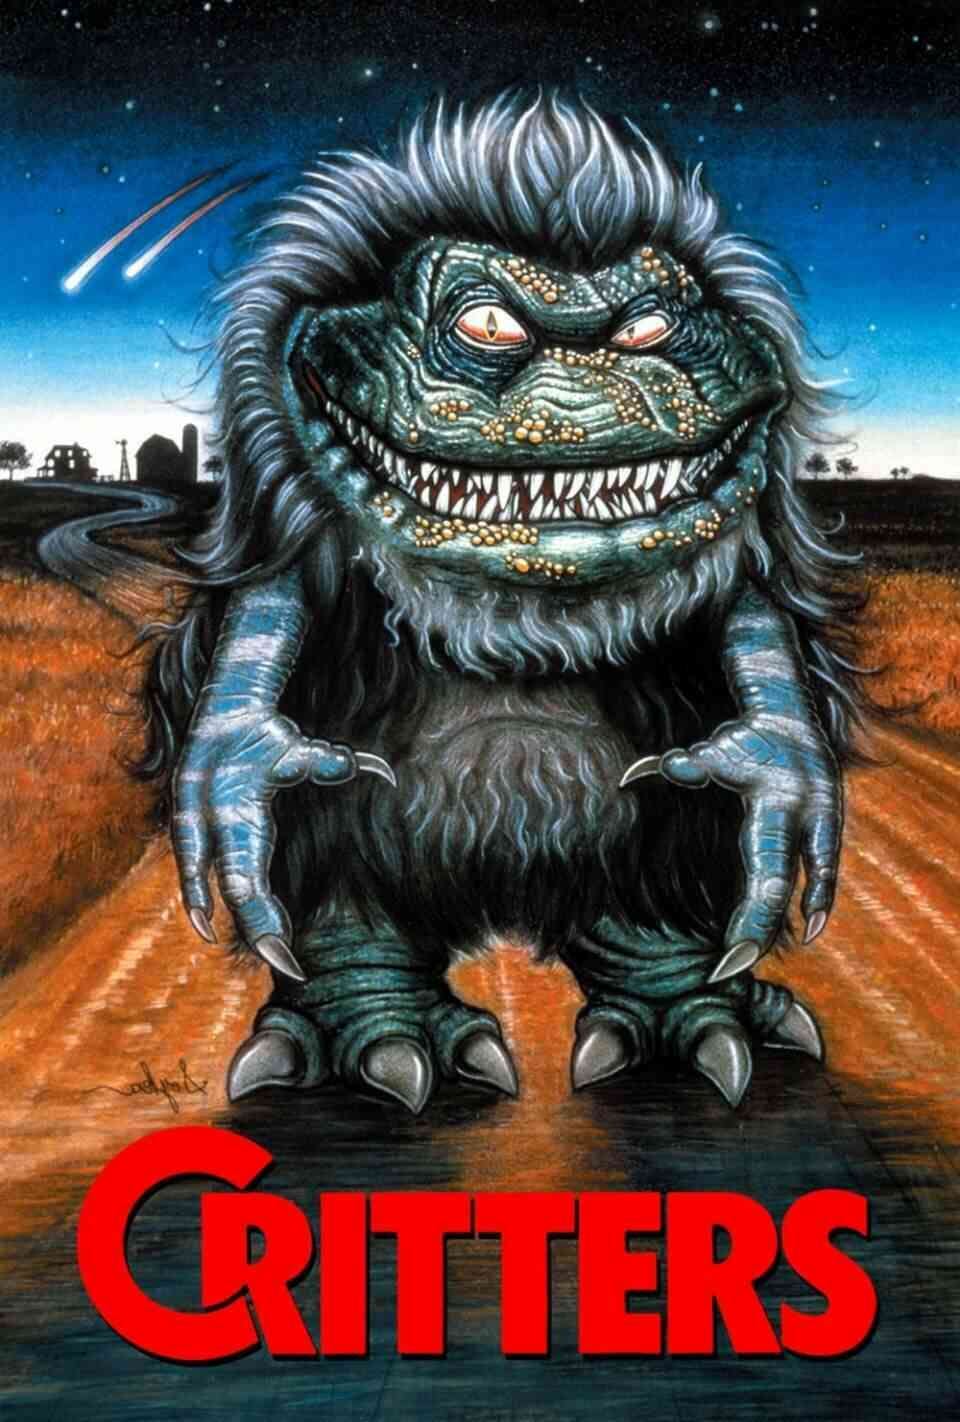 Read Critters screenplay (poster)